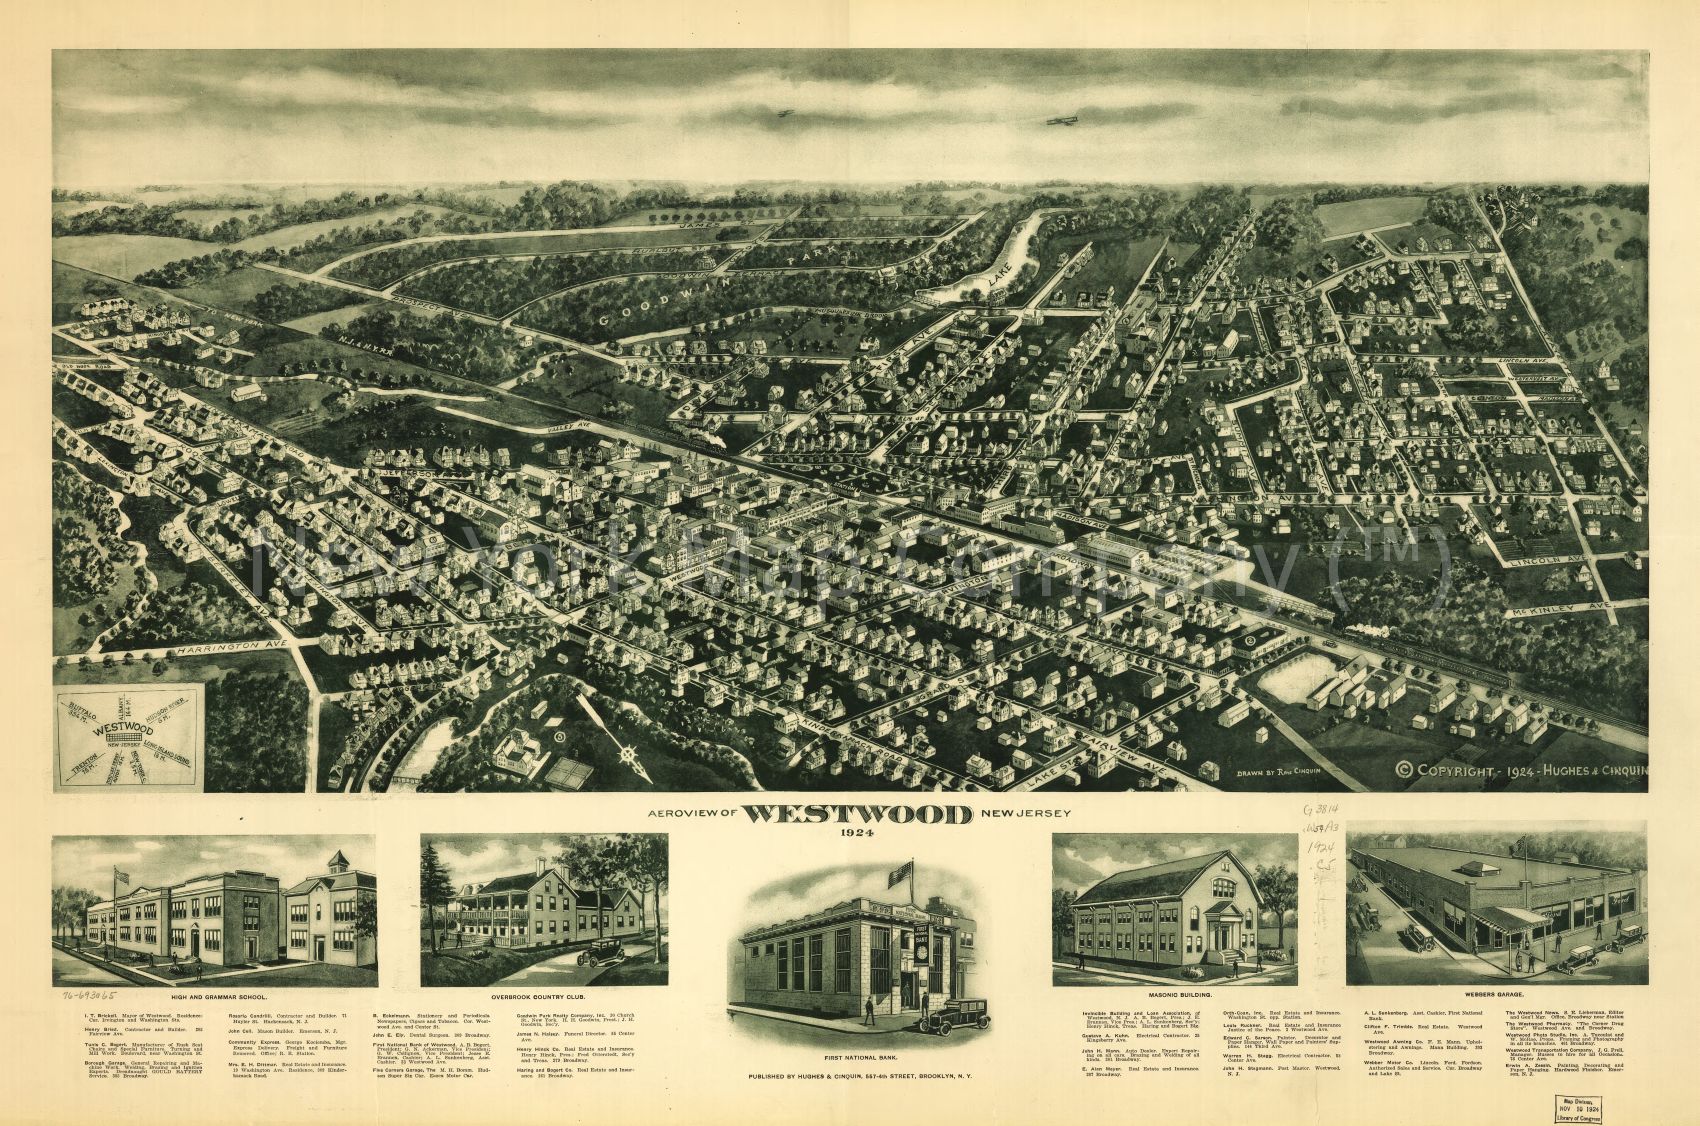 1924 map Aeroview of Westwood, New Jersey 1924. Map Subjects: New Jersey | Westwood | Westwood NJ